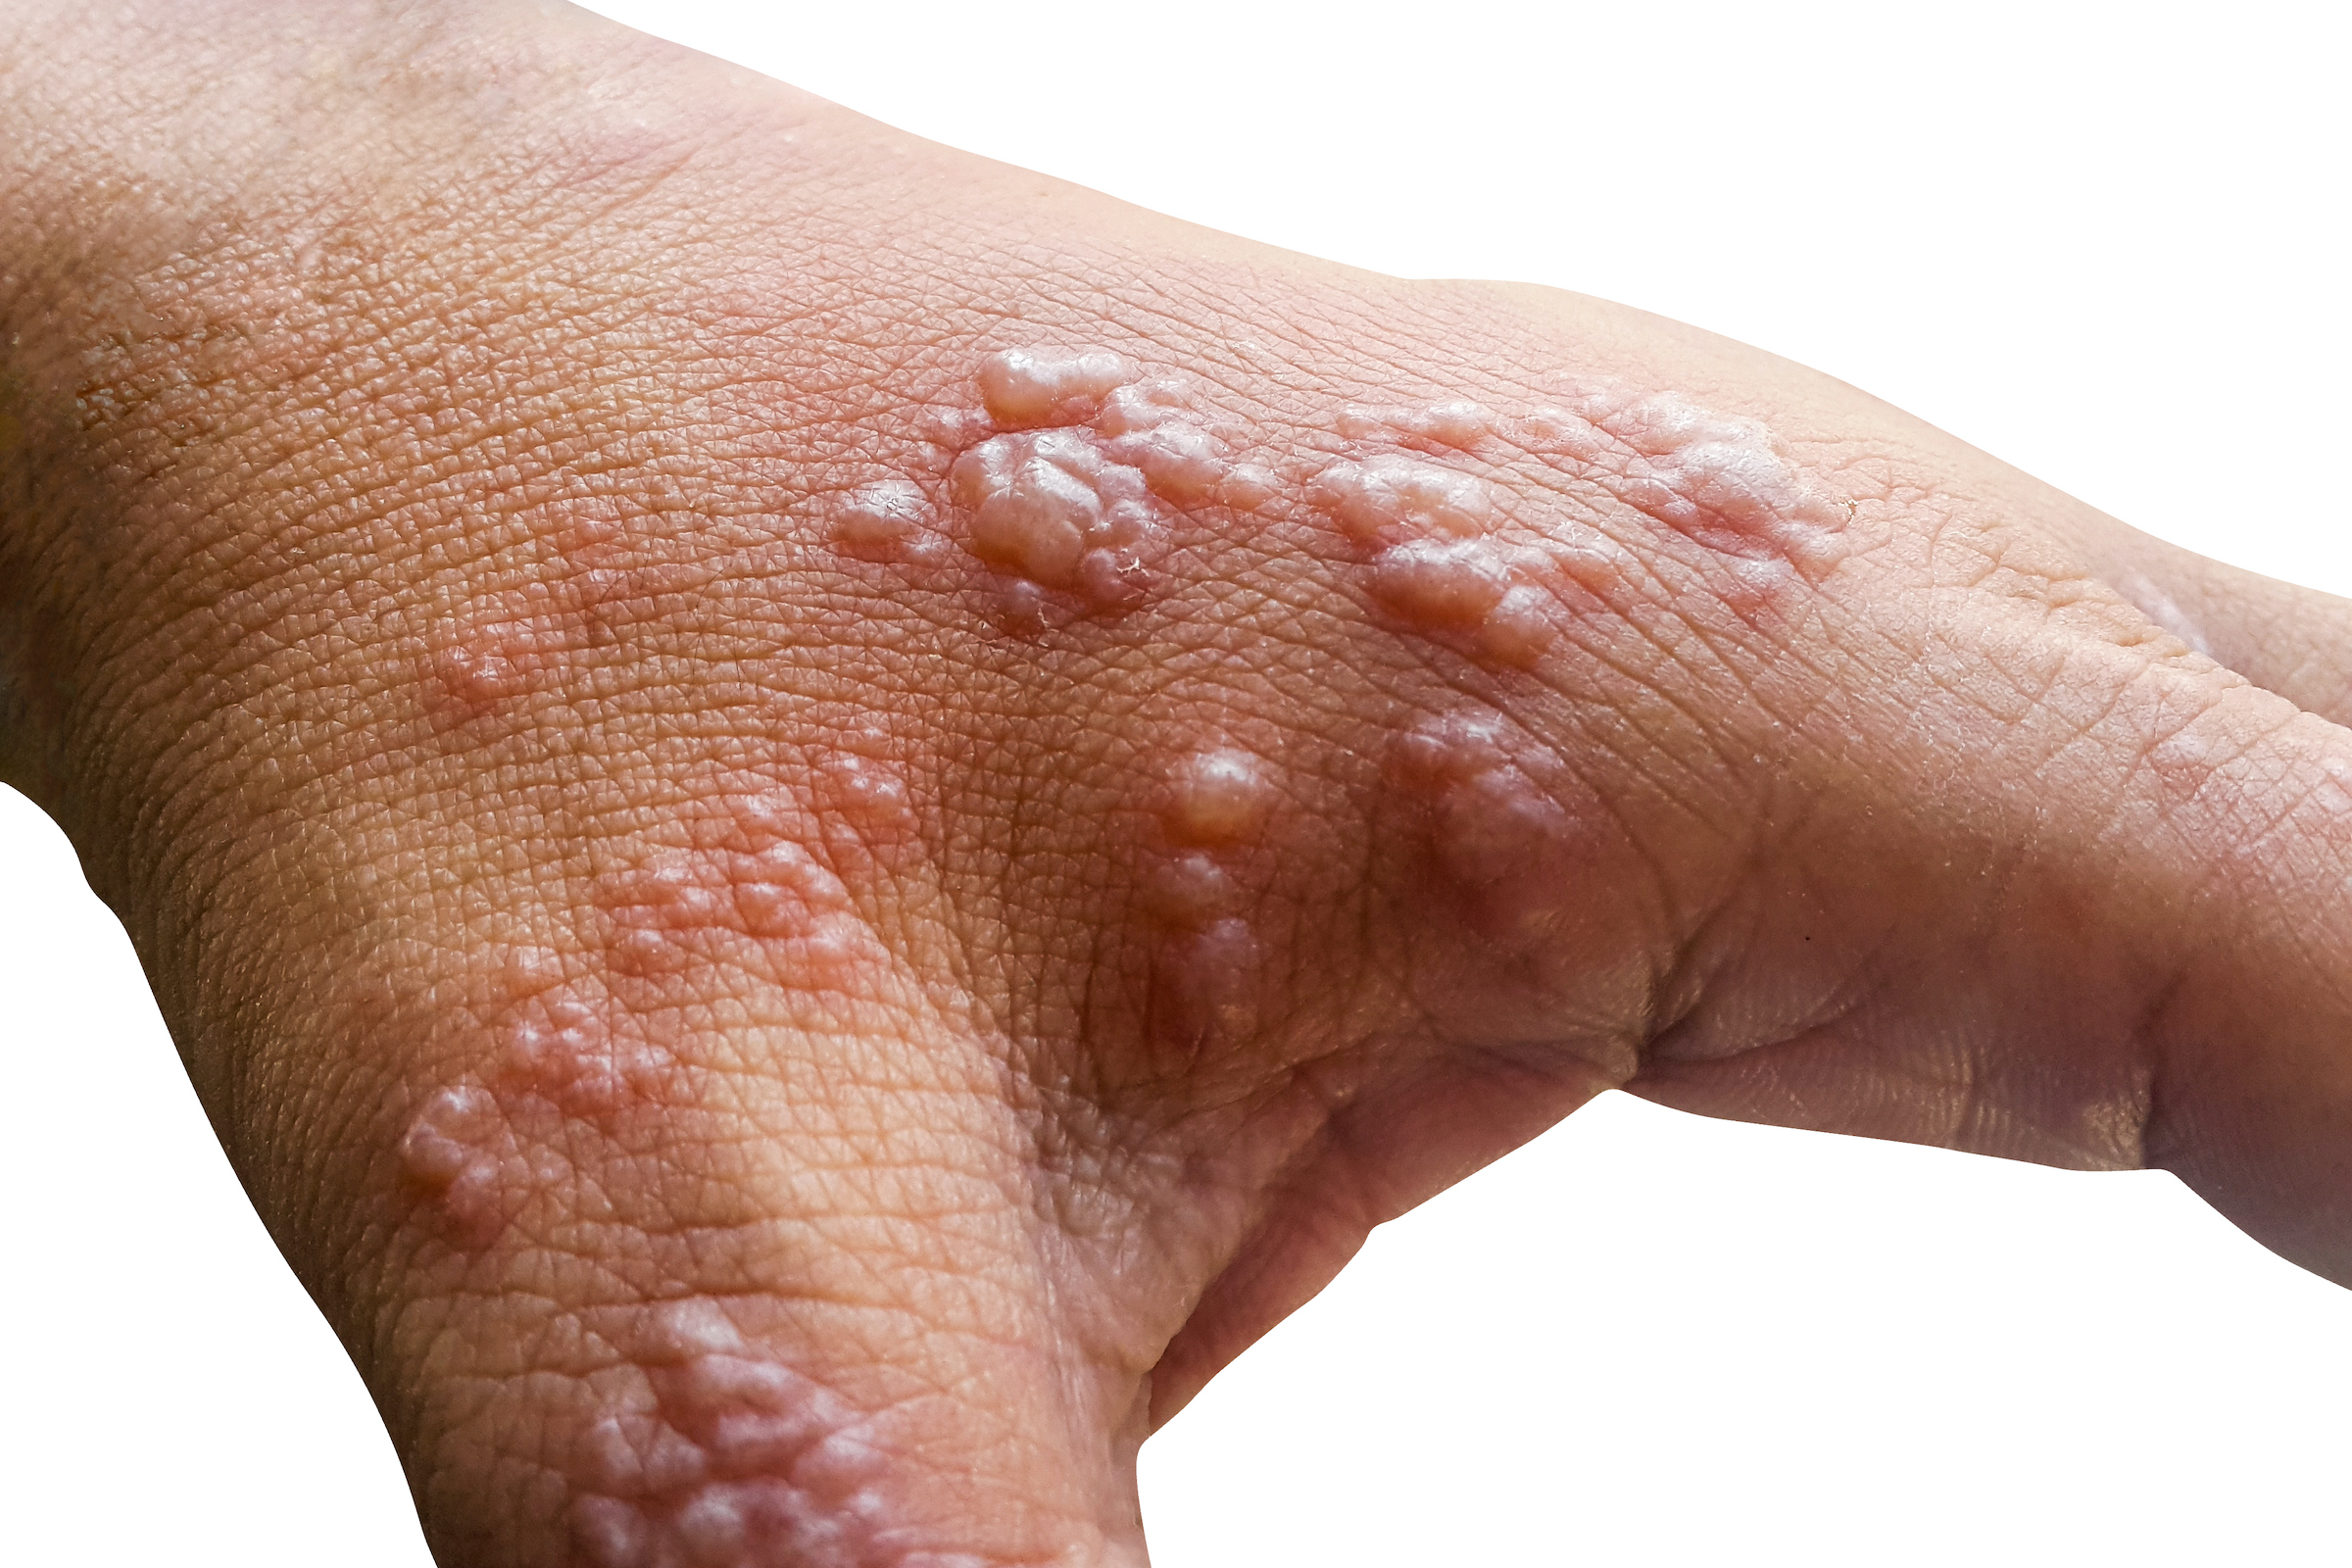 Shingles Symptoms, Causes, Treatments and Prevention